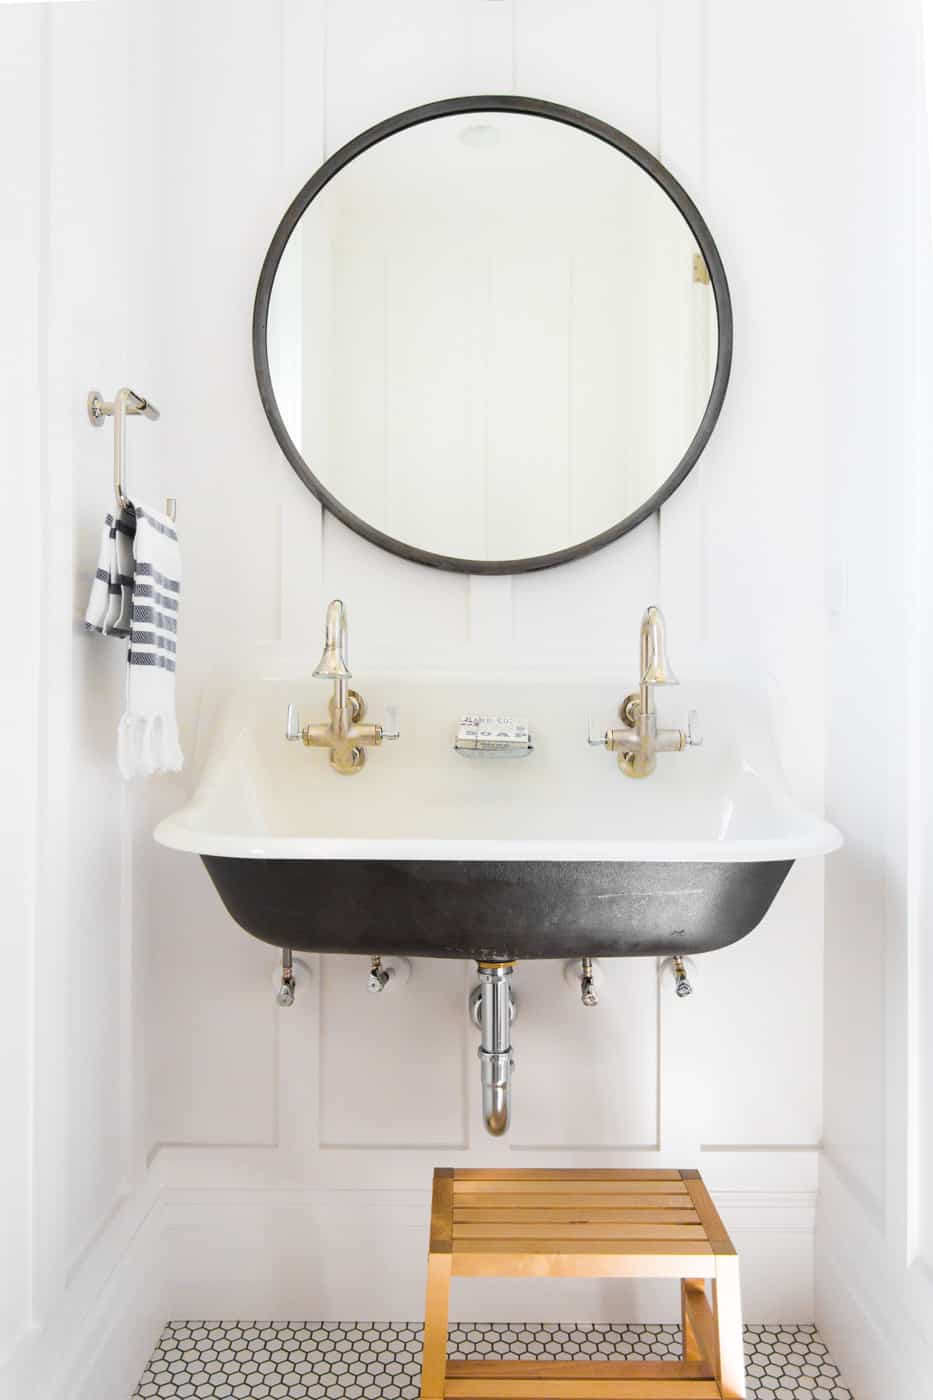 A deep sink is mounted to a white wainscoting covered wall, along with a round metal-framed mirror. The double faucets on the black and white sink are brass. A wooden step stool sits under the sink, and the floor is tiled with white hexagon tiles and dark grout.